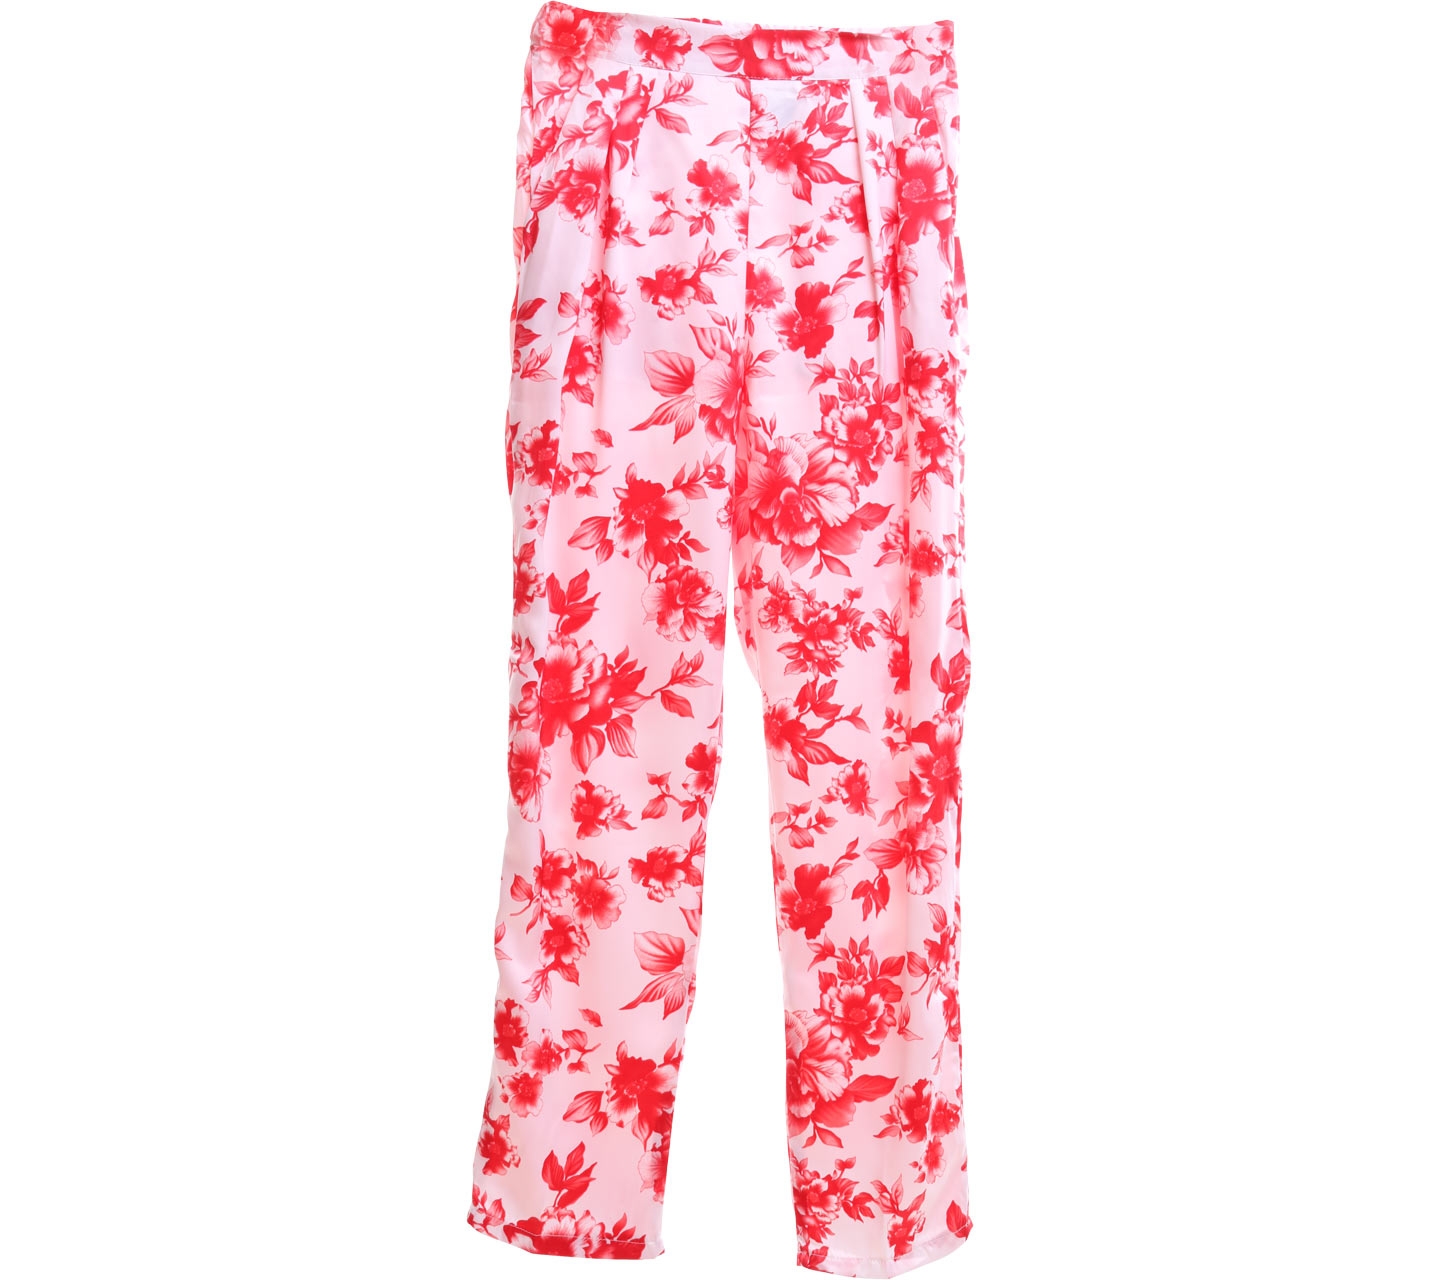 Clementine White & Red Floral Long Pants